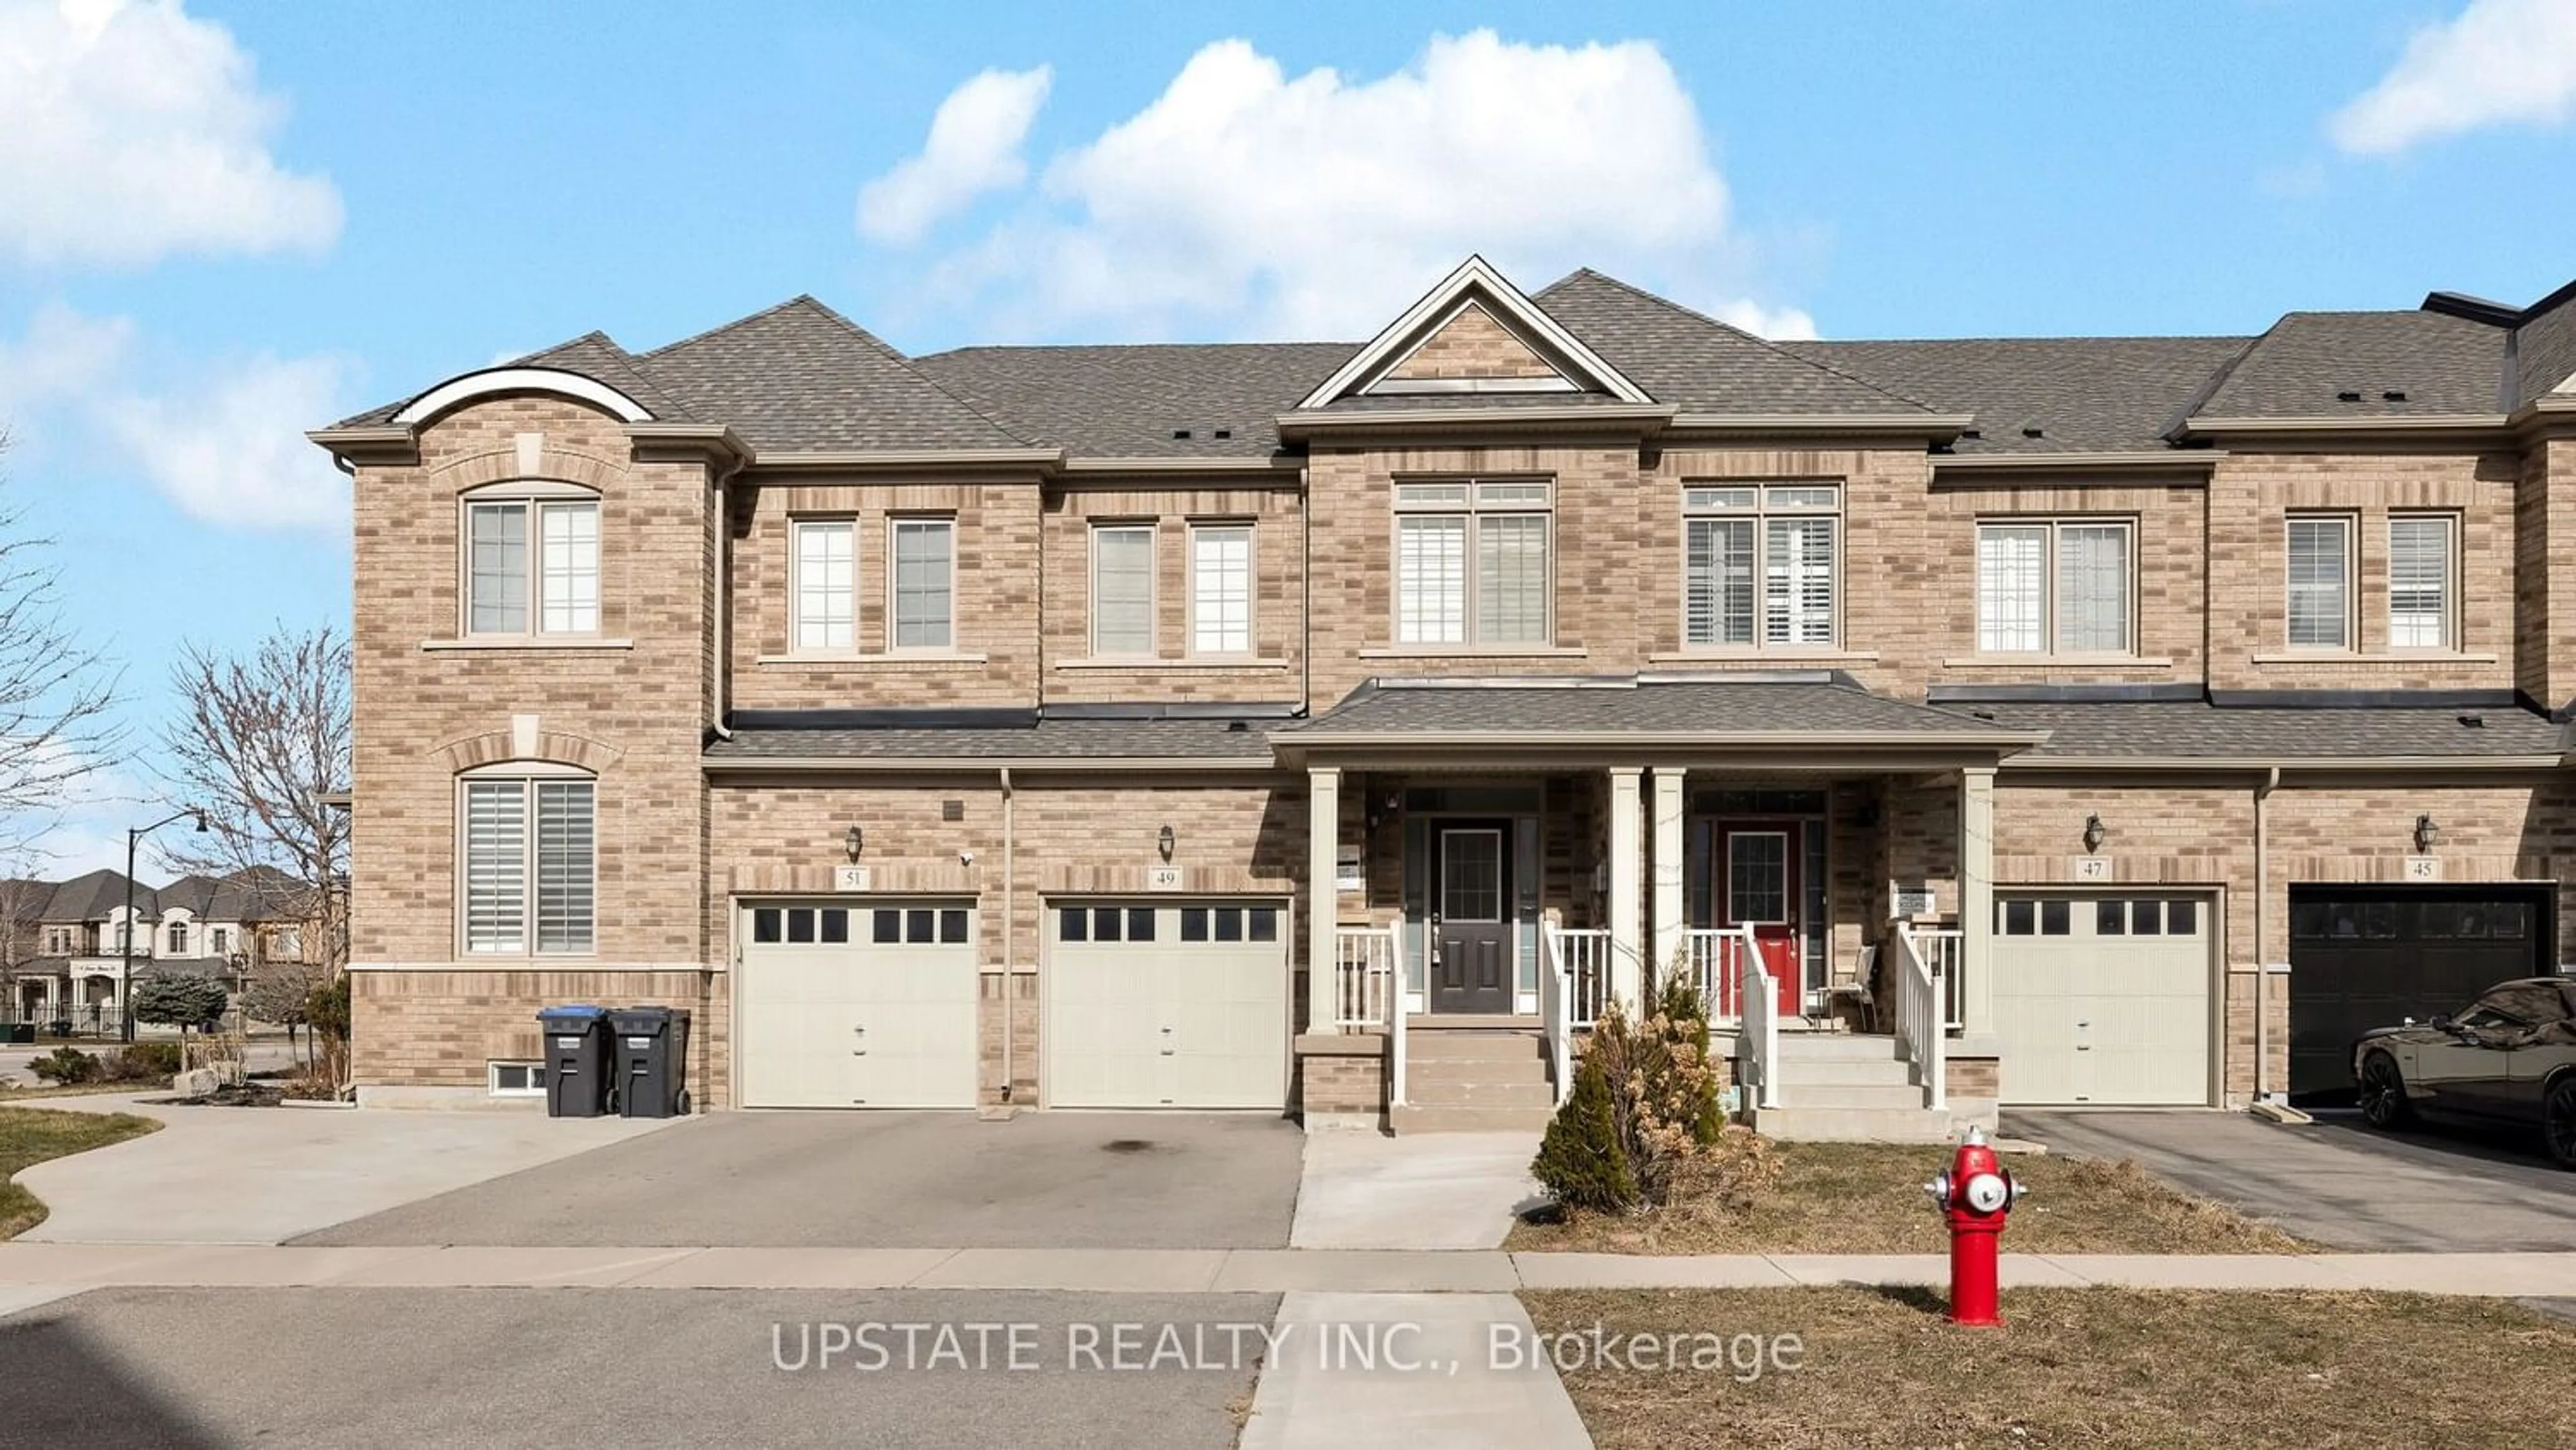 Home with brick exterior material for 49 Lady Evelyn Cres, Brampton Ontario L6Y 6C6